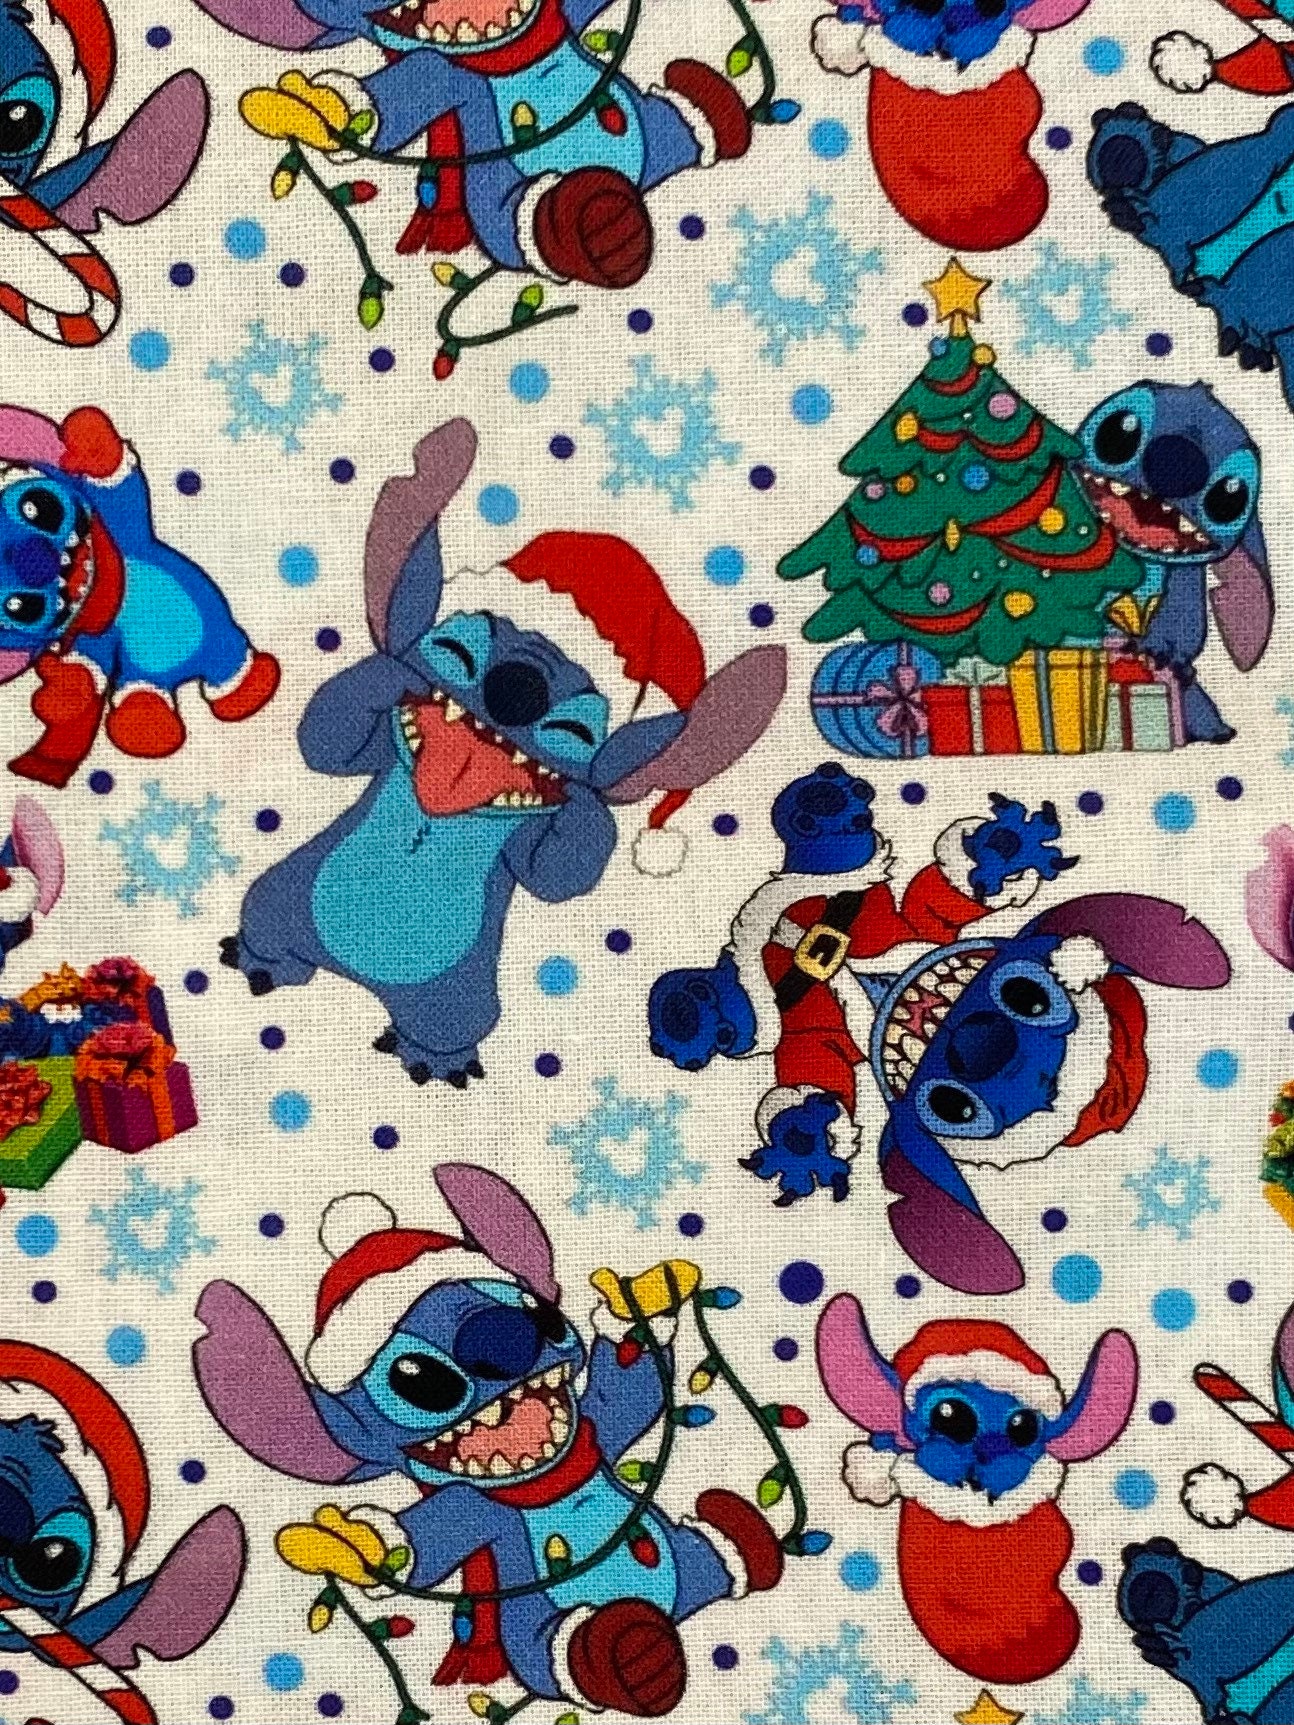 Stitch is ready for Christmas  Christmas wallpaper iphone cute